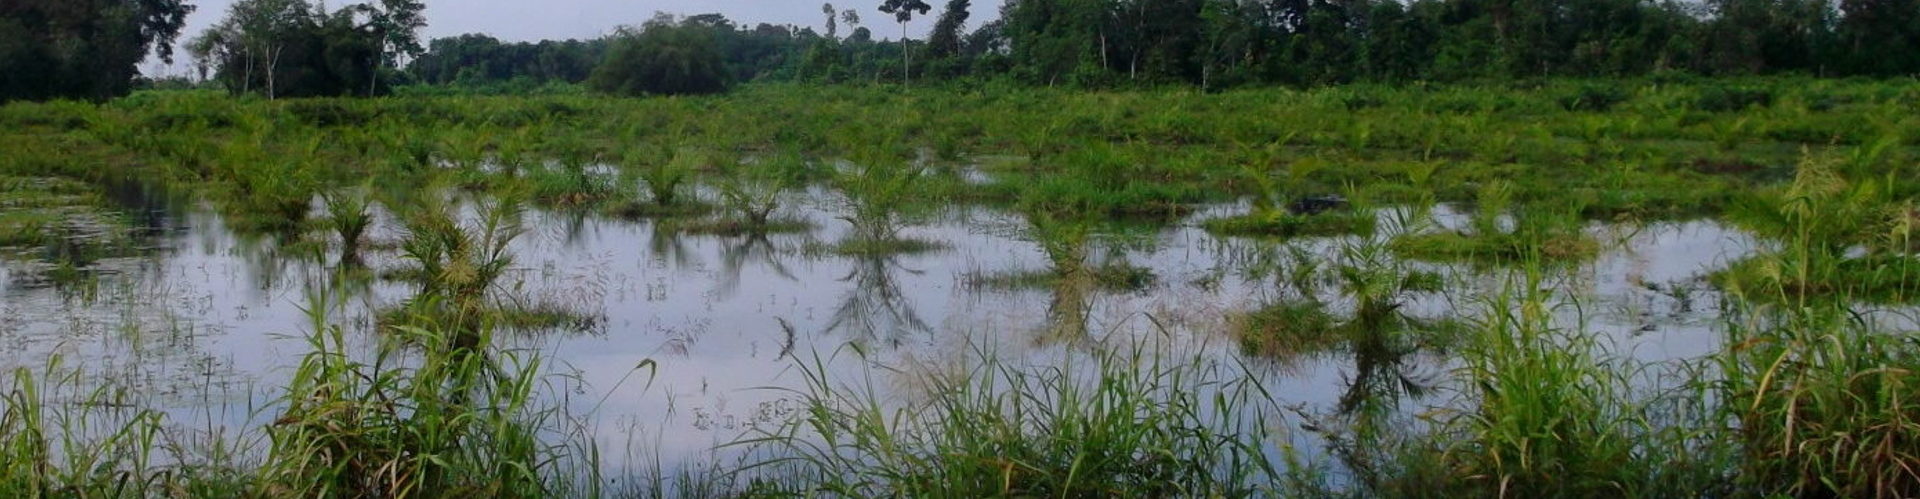 Flooding surrounds plants in Indonesia